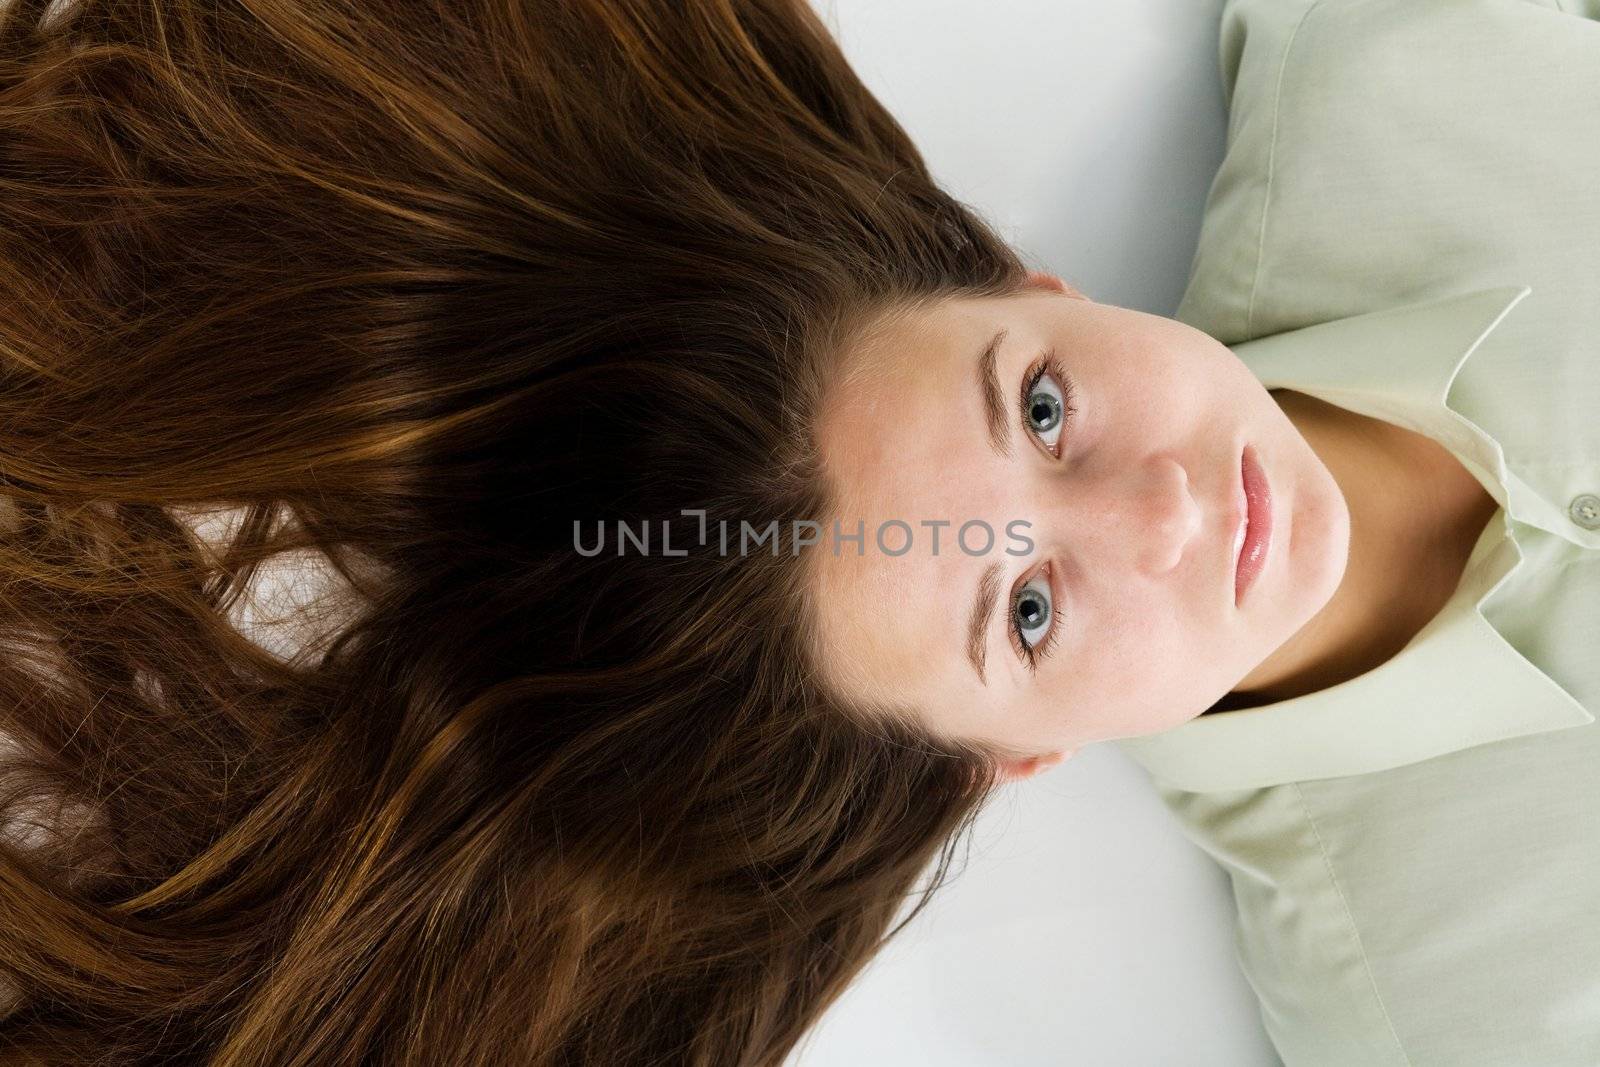 An image of a nice girl with long hair